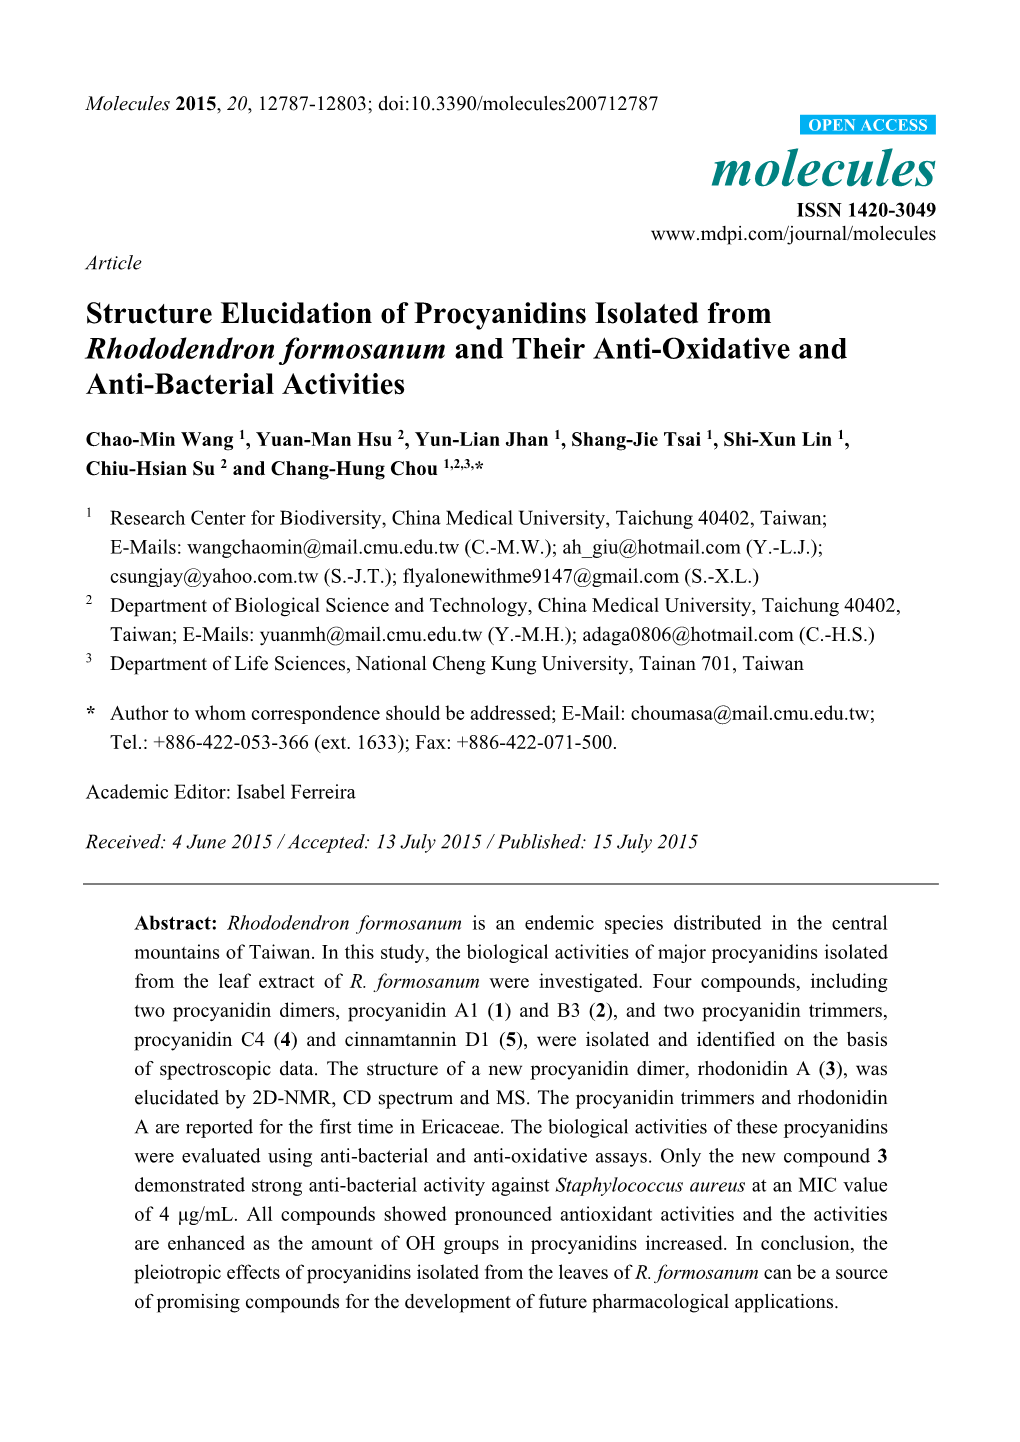 Structure Elucidation of Procyanidins Isolated from Rhododendron Formosanum and Their Anti-Oxidative and Anti-Bacterial Activities